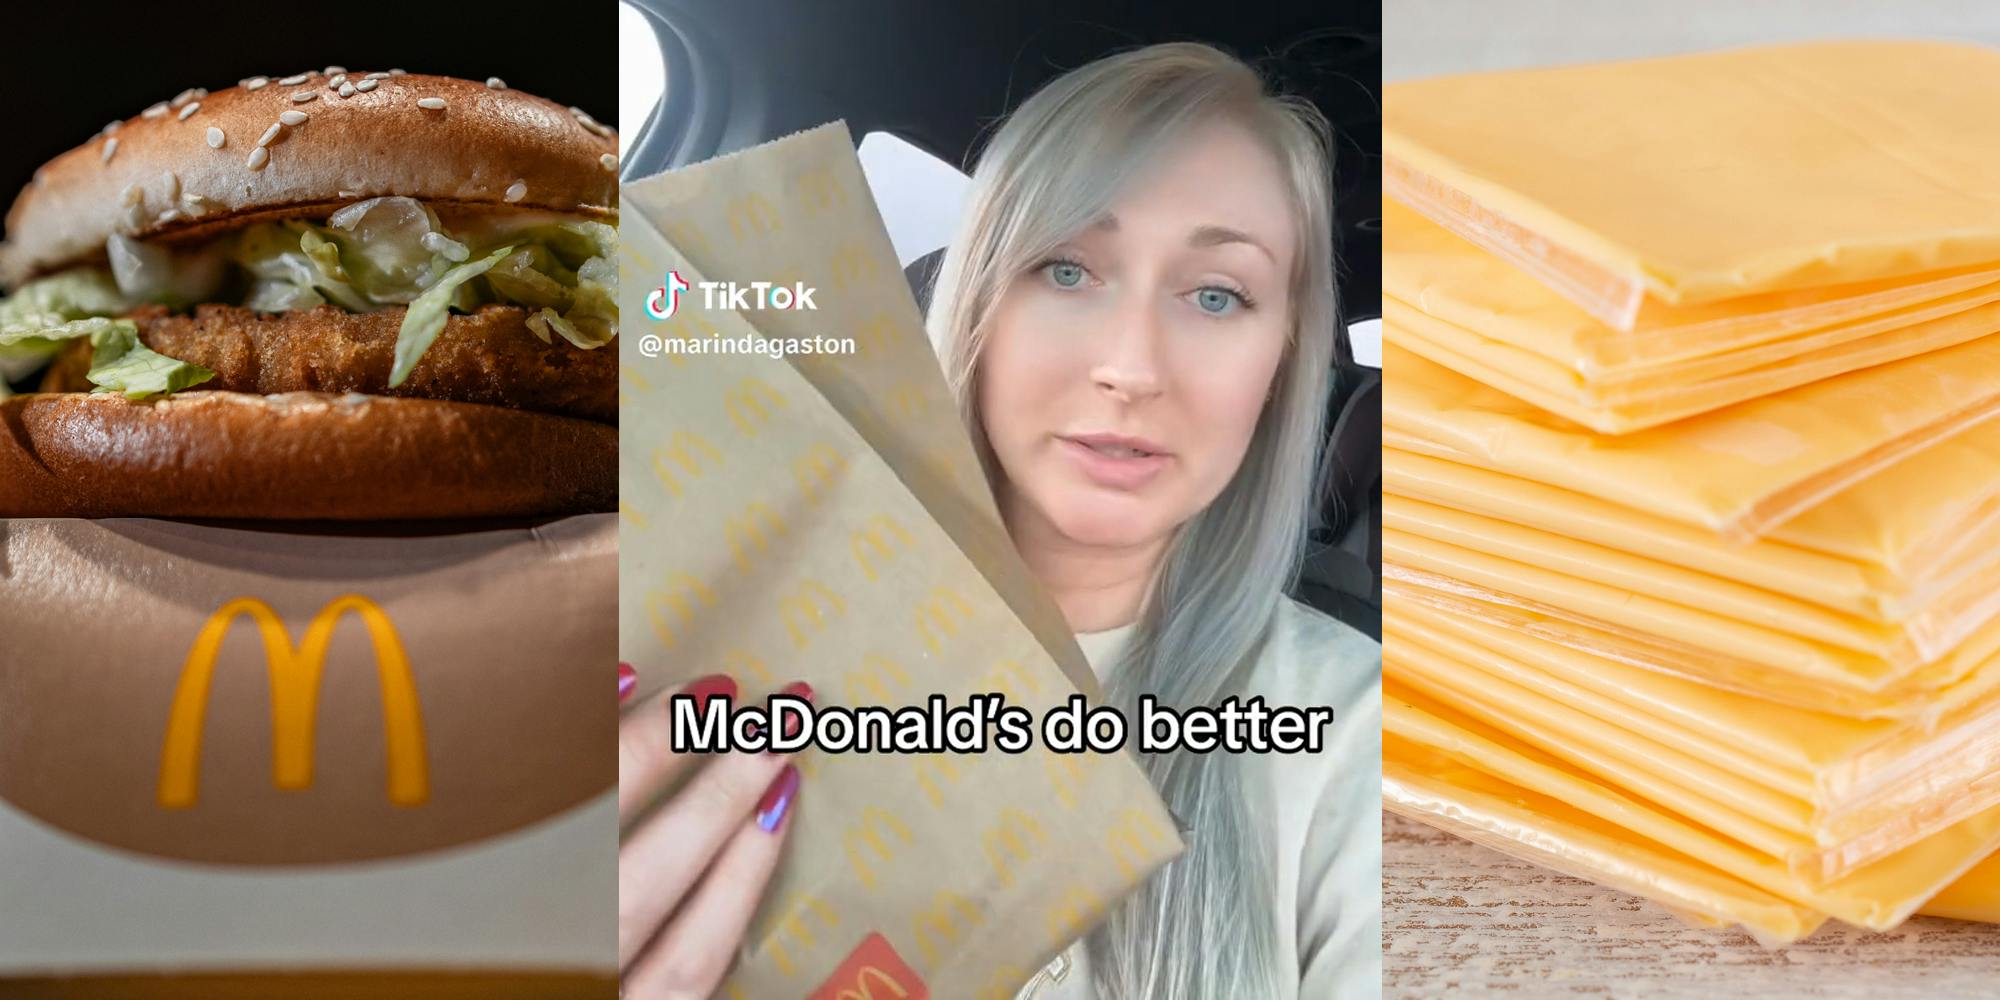 McChicken sandwich (l) Woman in car holding McDonald's bag with caption "McDonald's do better" (c) processed slices of cheese (r)